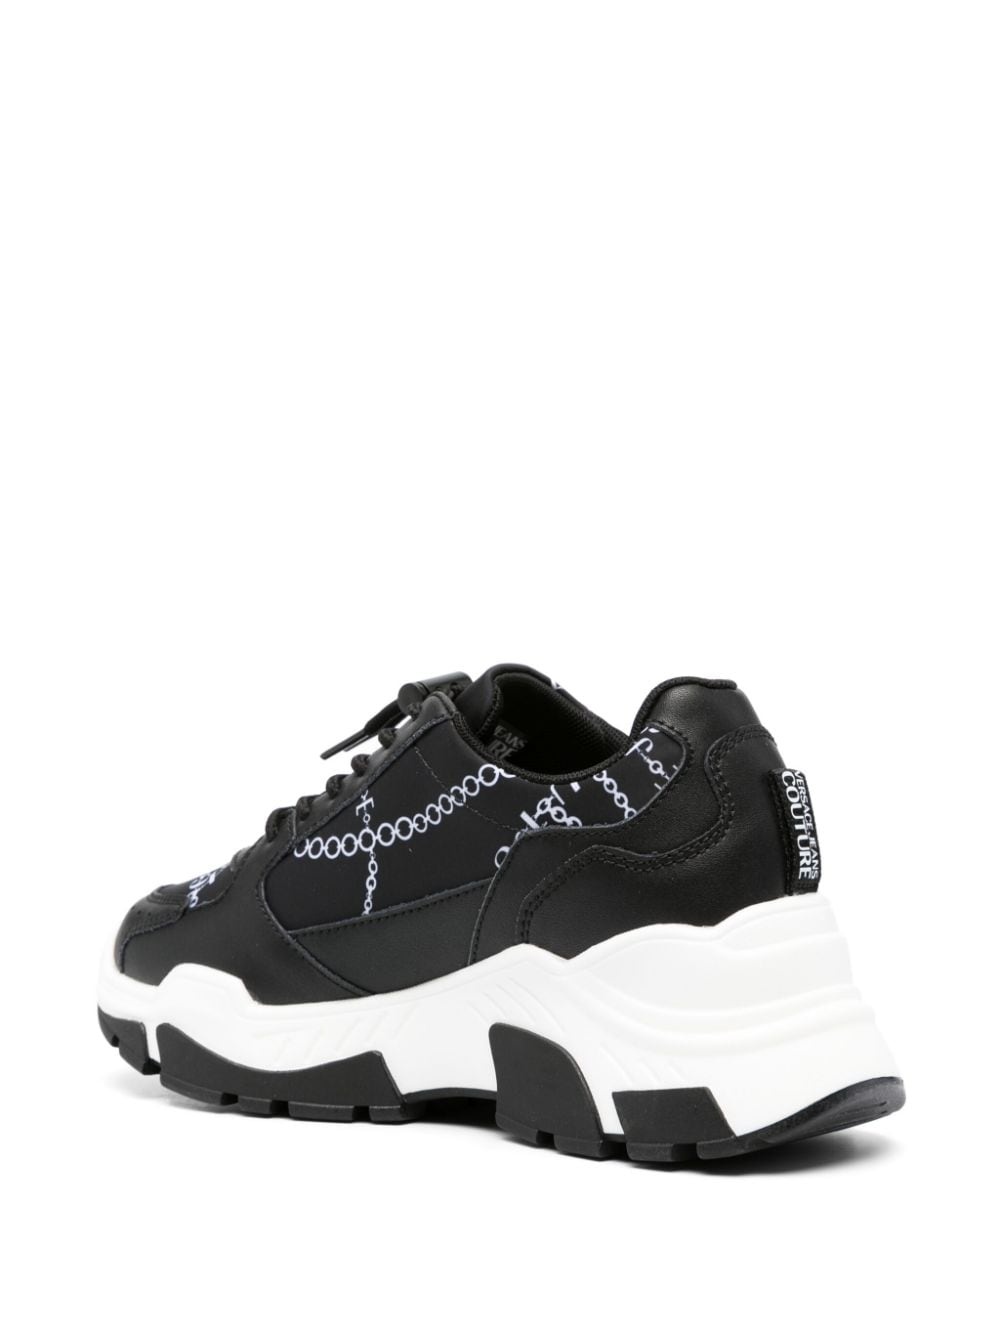 chain-link print panelled sneakers - 3